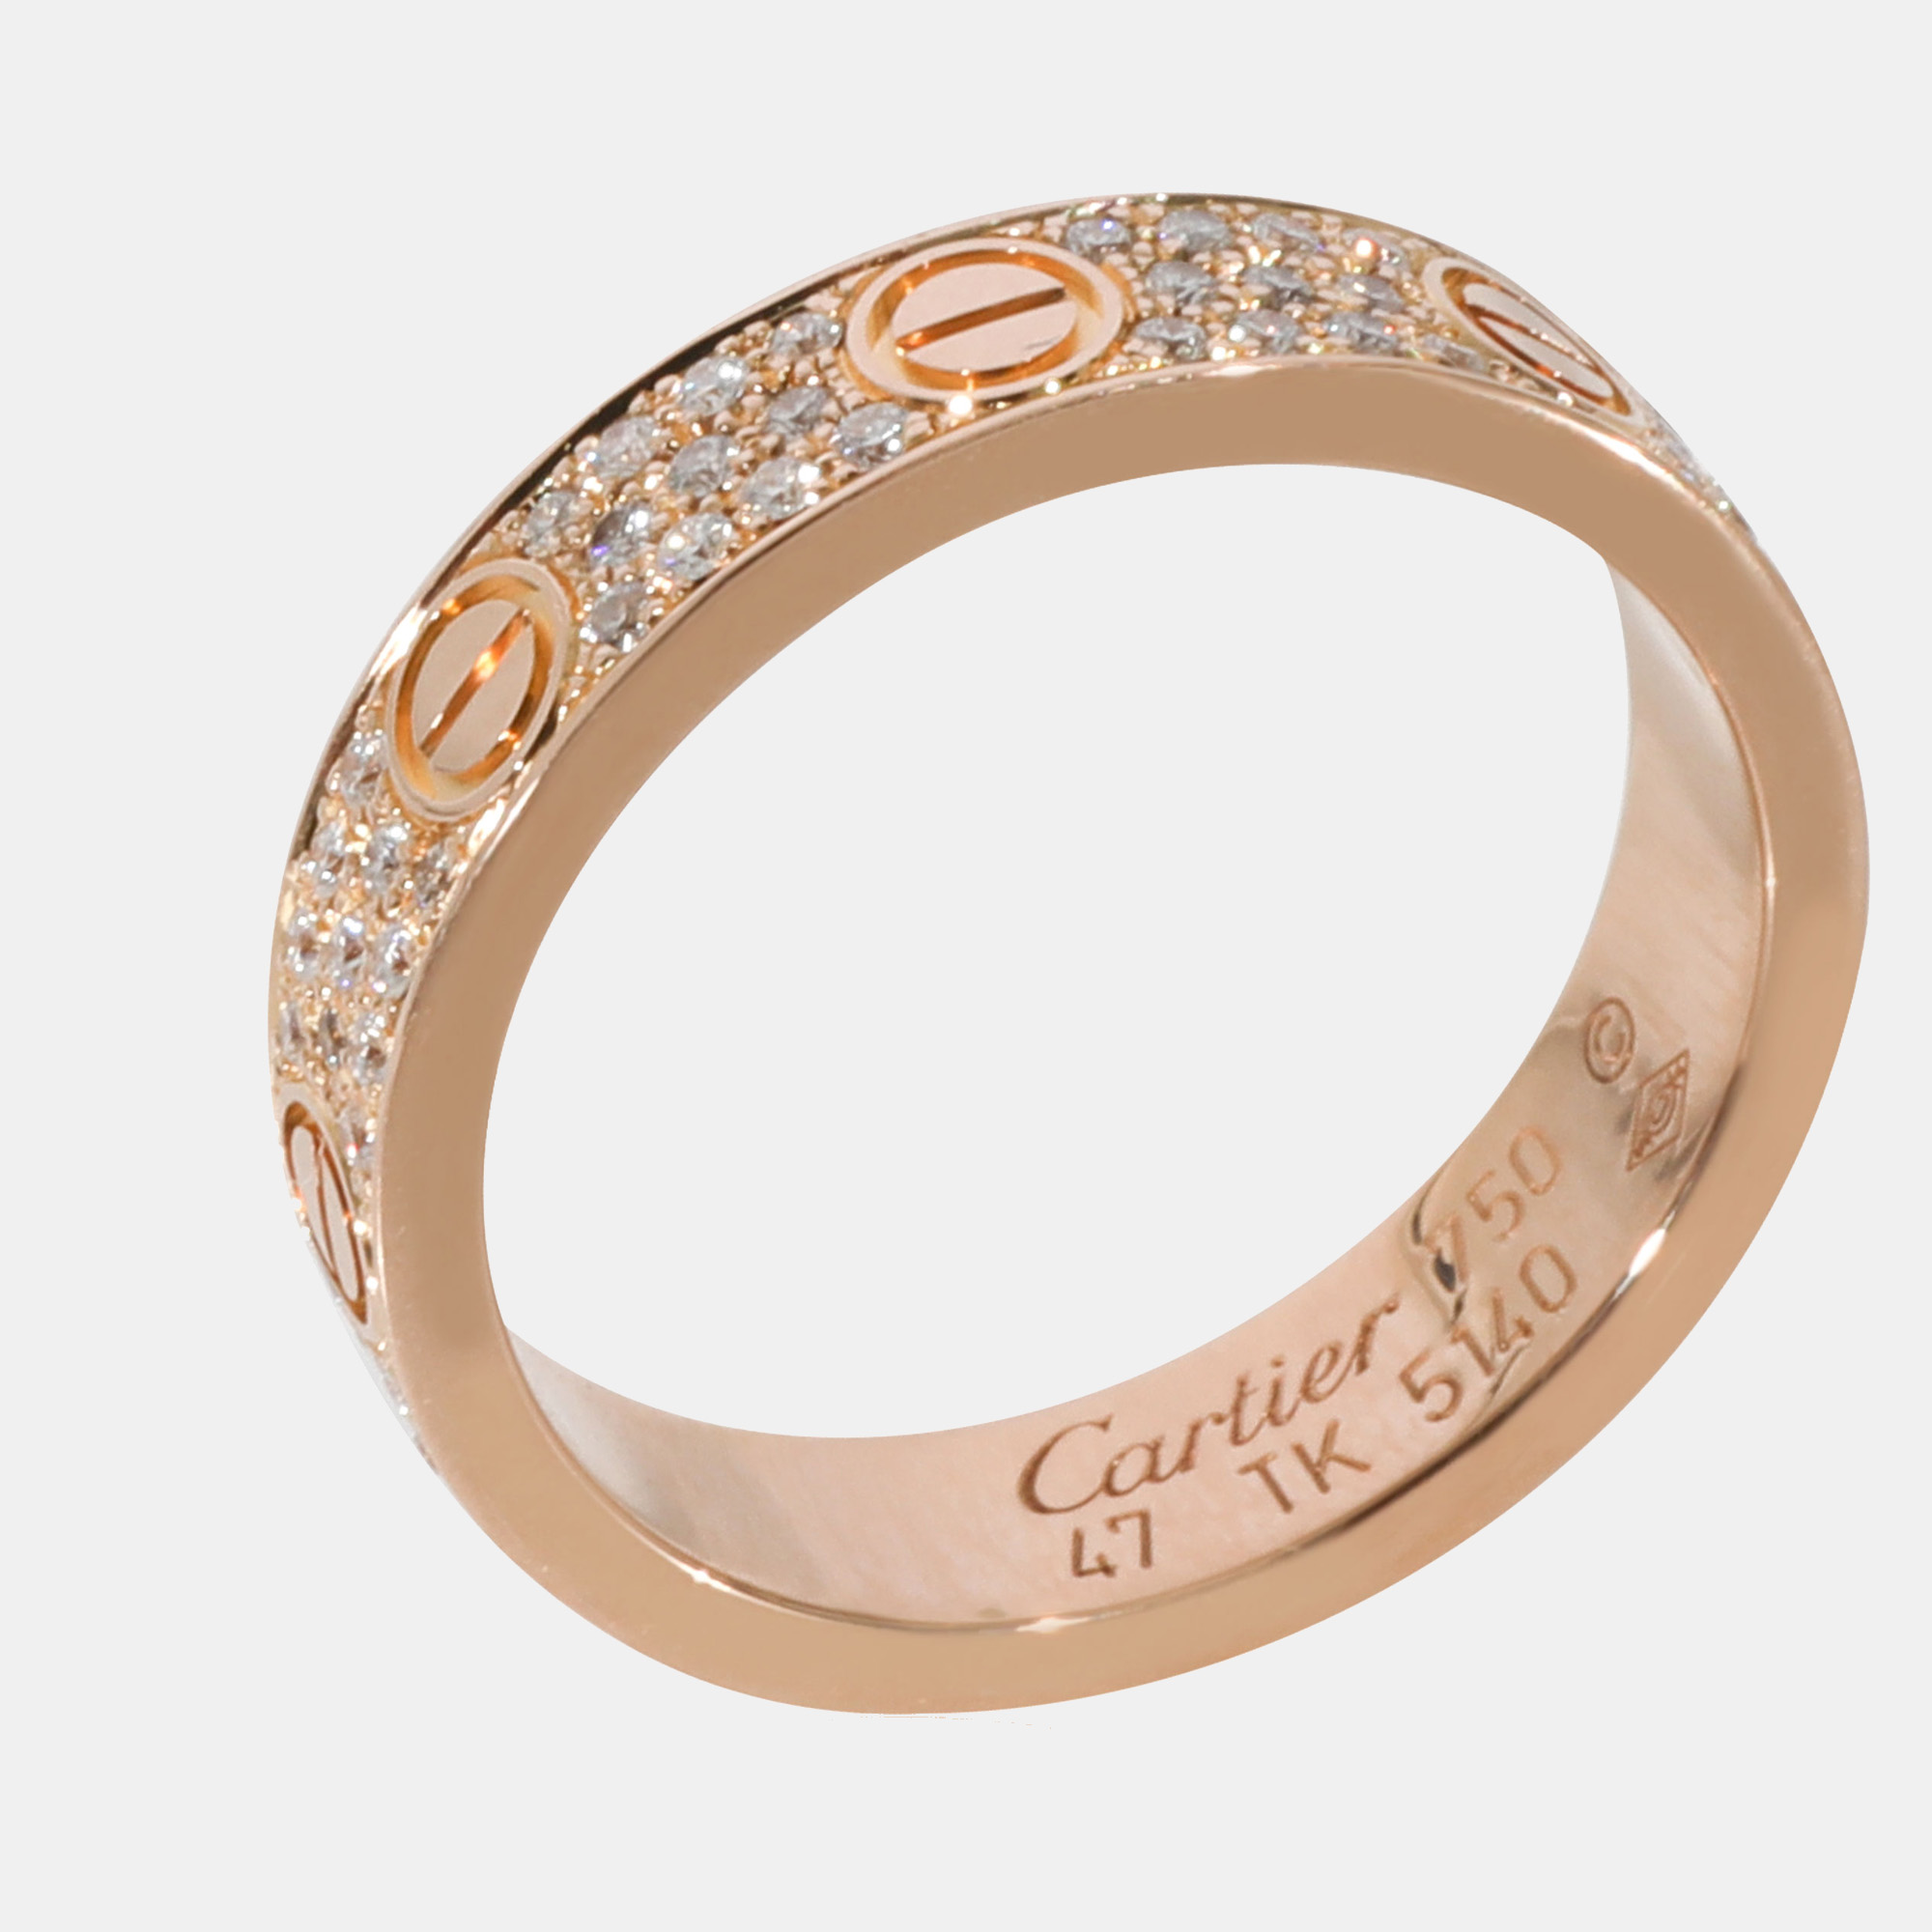 Cartier Love Diamond Pave Band In 18k Rose Gold 0.31 CTW Ring US 4